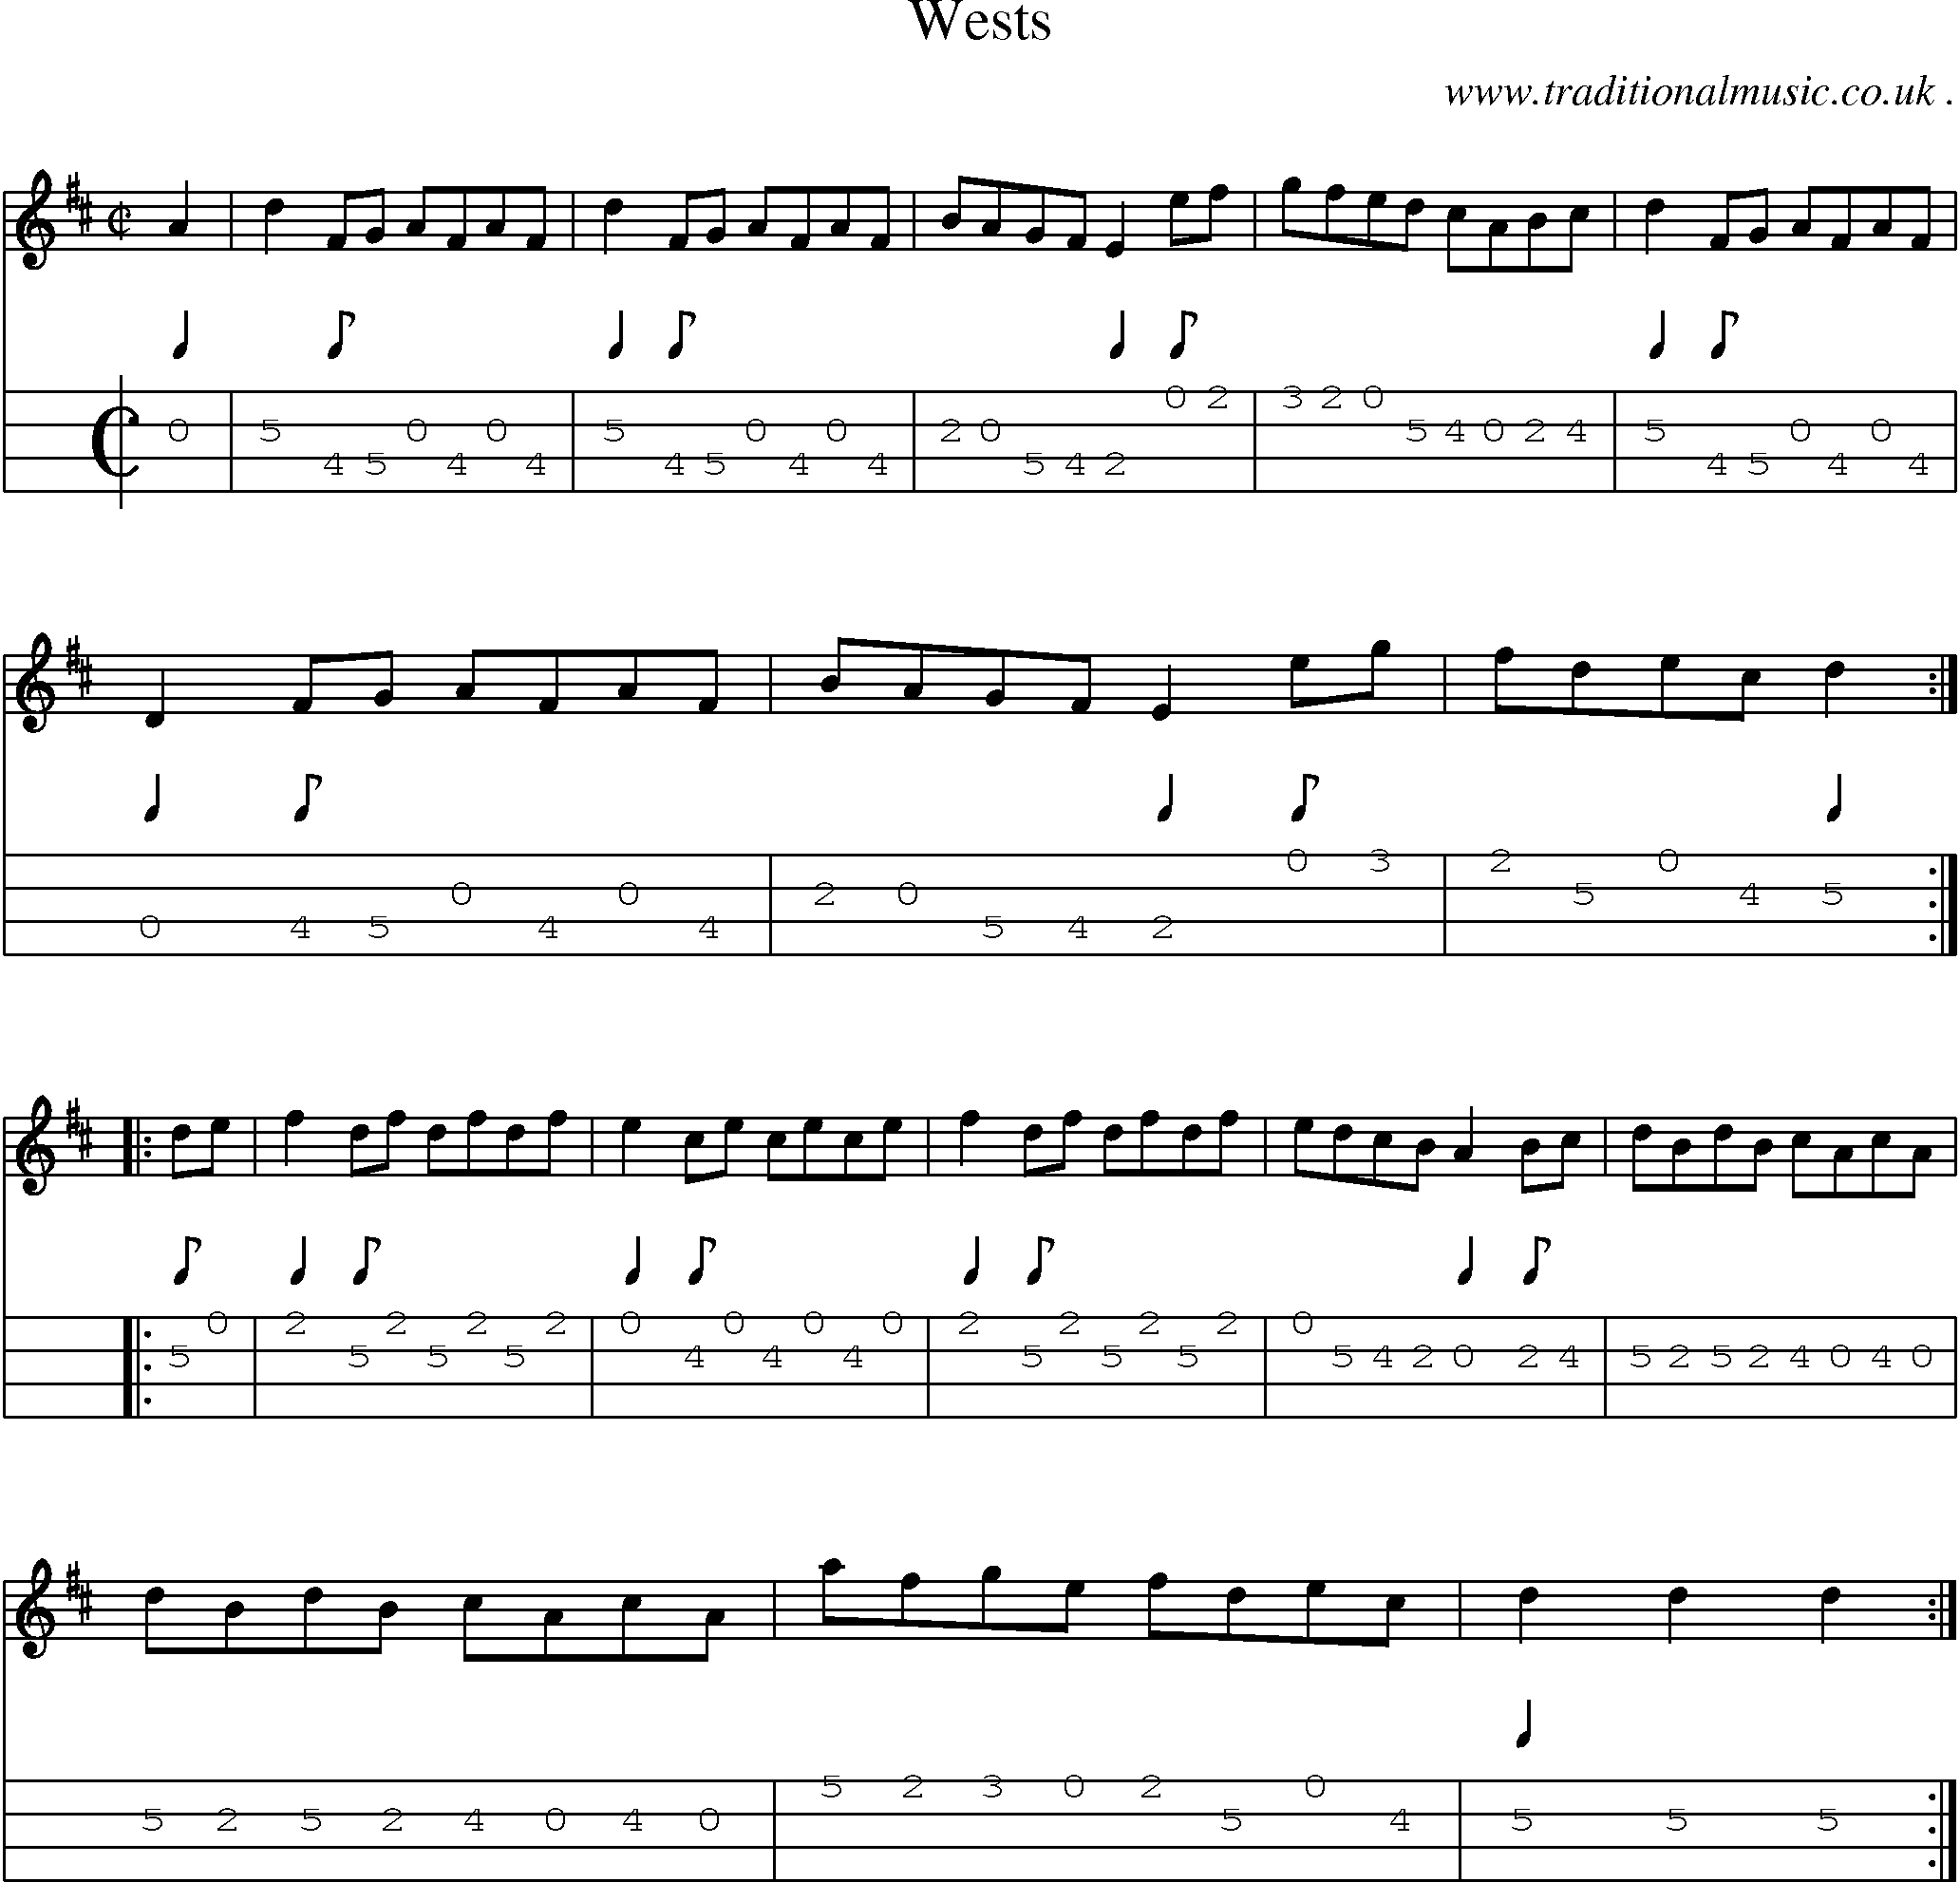 Sheet-music  score, Chords and Mandolin Tabs for Wests